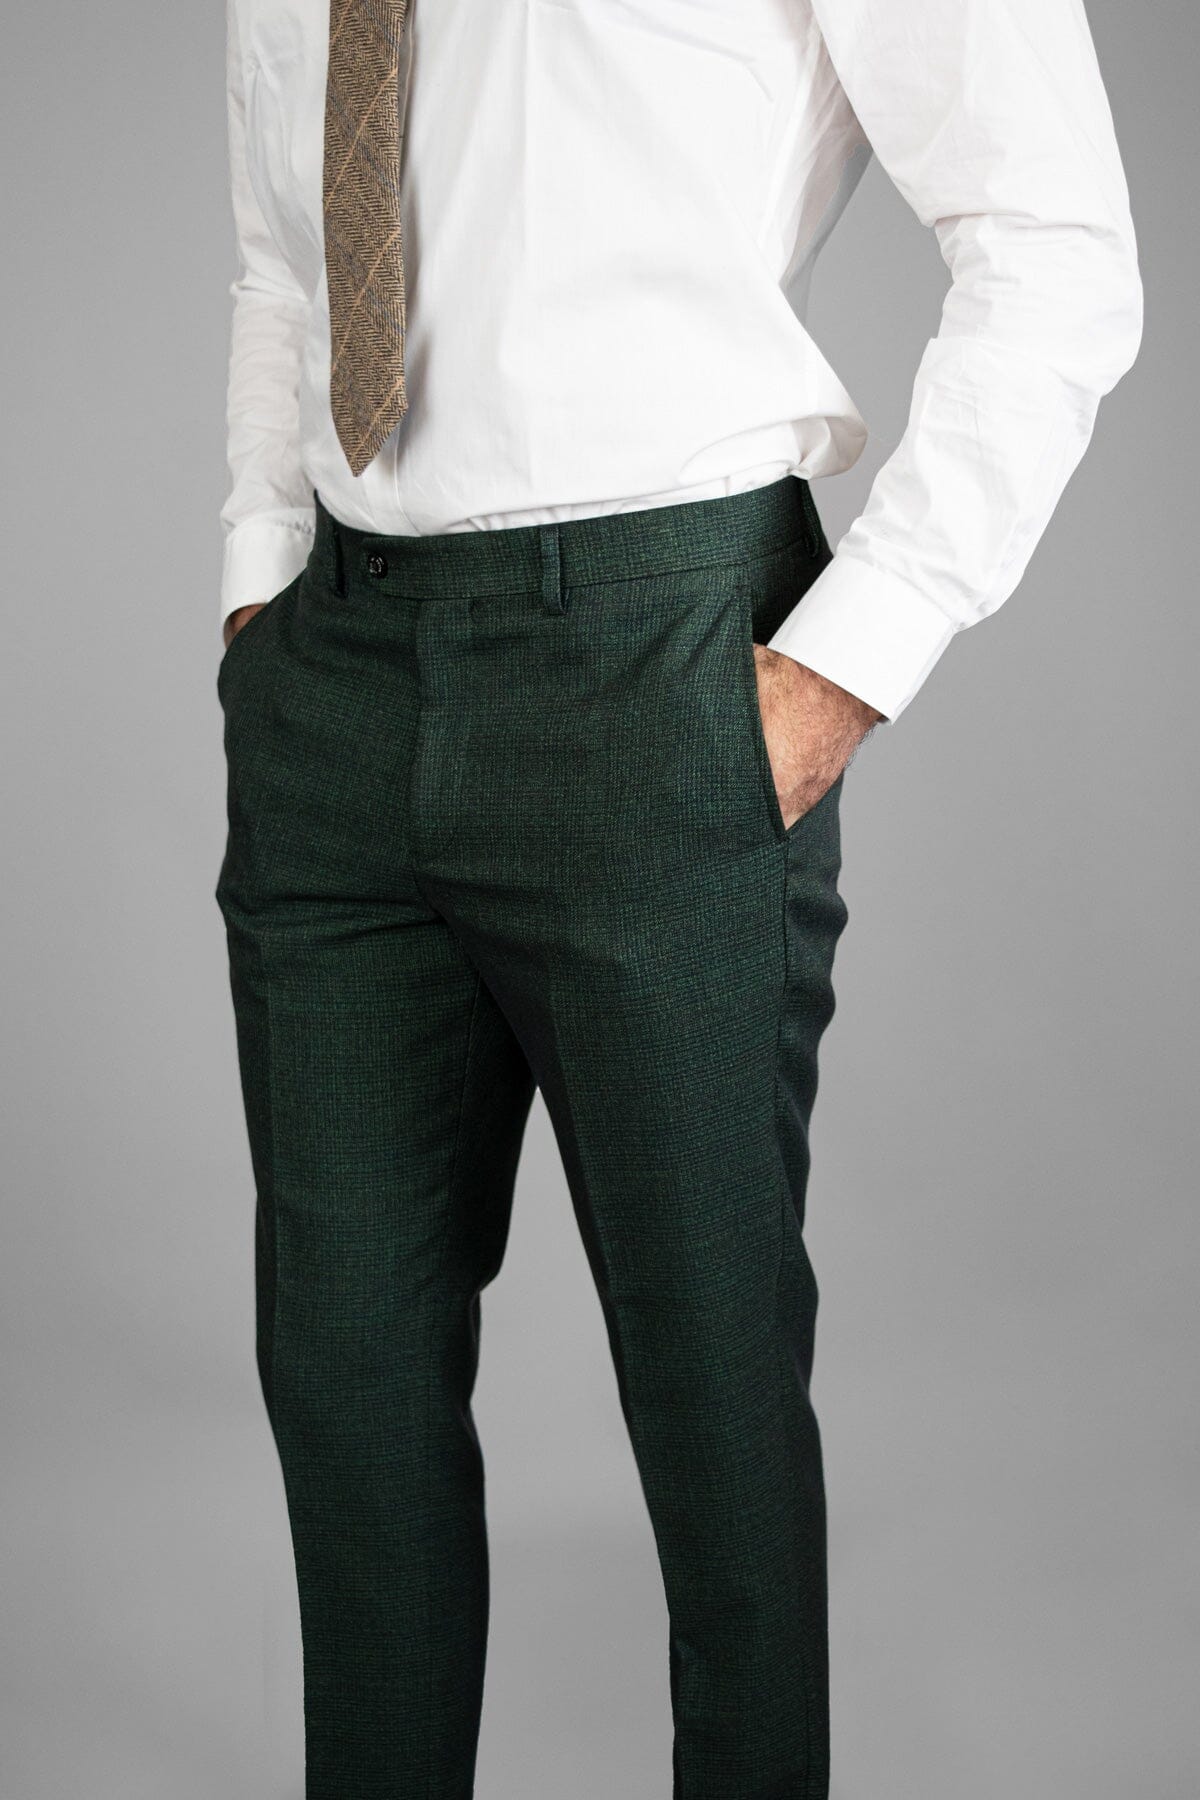 Caridi Olive Tweed Trousers - Trousers - 